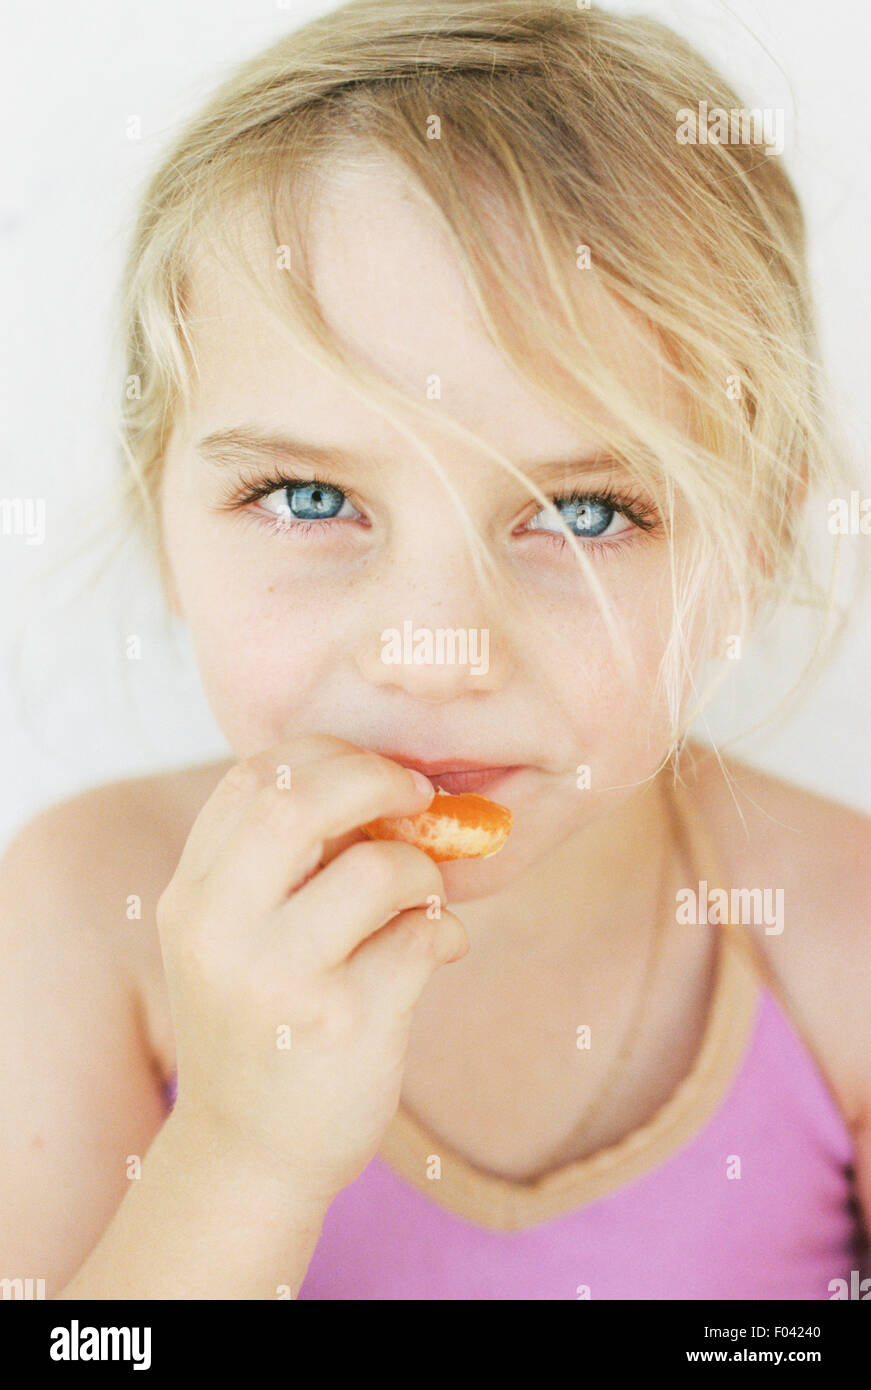 Portrait of a young blond girl, eating a mandarin, looking at the camera. Stock Photo